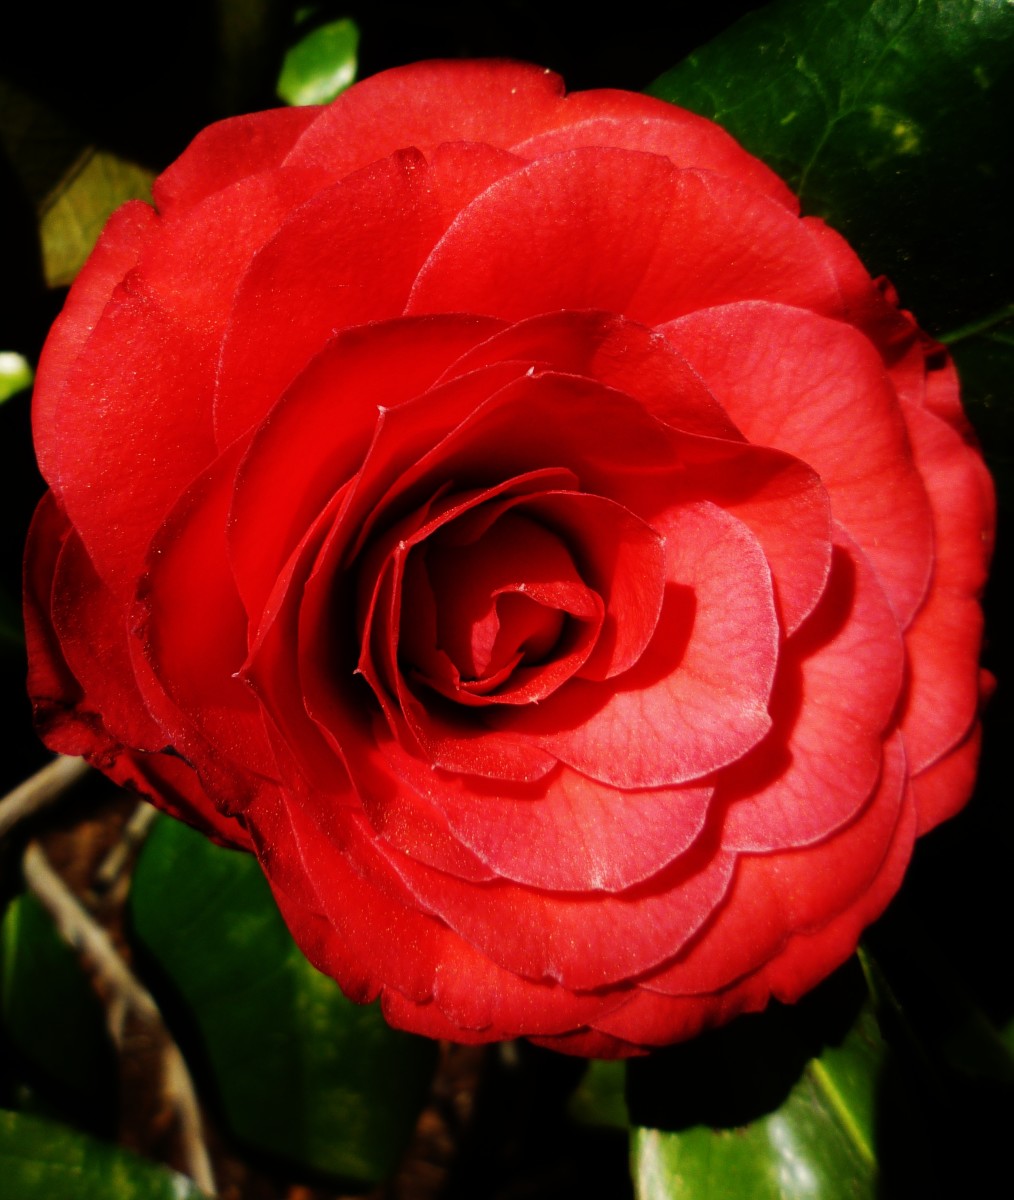 Another one of our camellias in bloom.